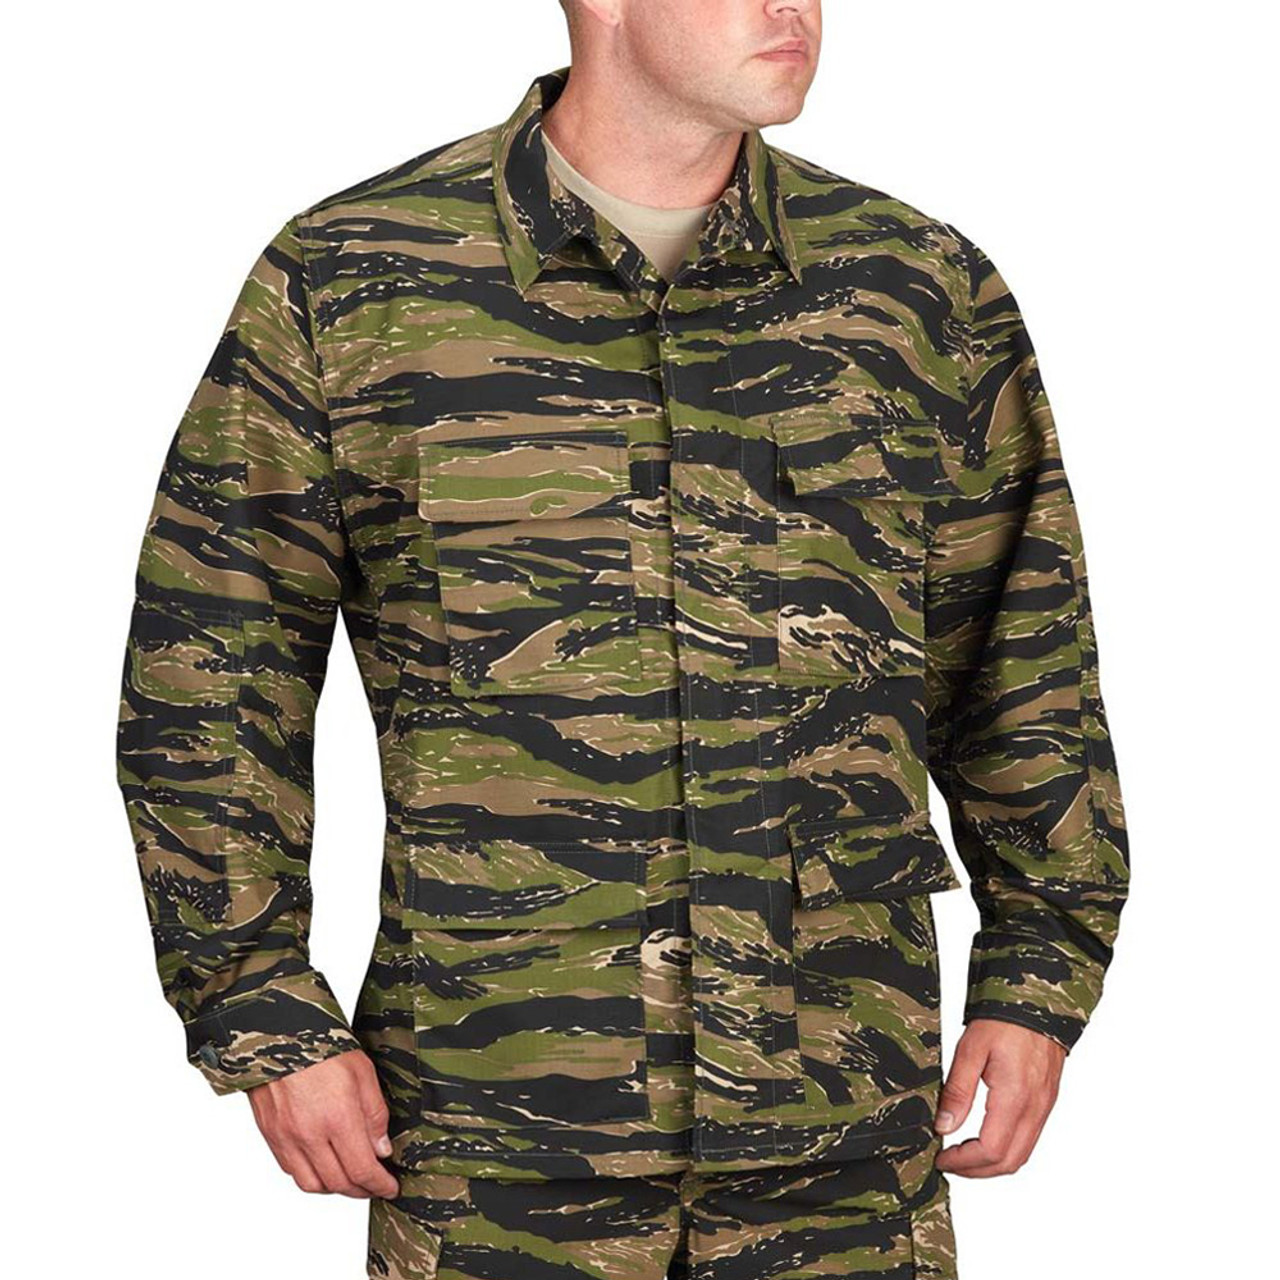 Propper F5450-25 BDU Tactical Uniform Coat Jacket, Cotton/Polyester ripstop, Adjustable Cuffs, Four front cargo pockets with hidden button flaps,